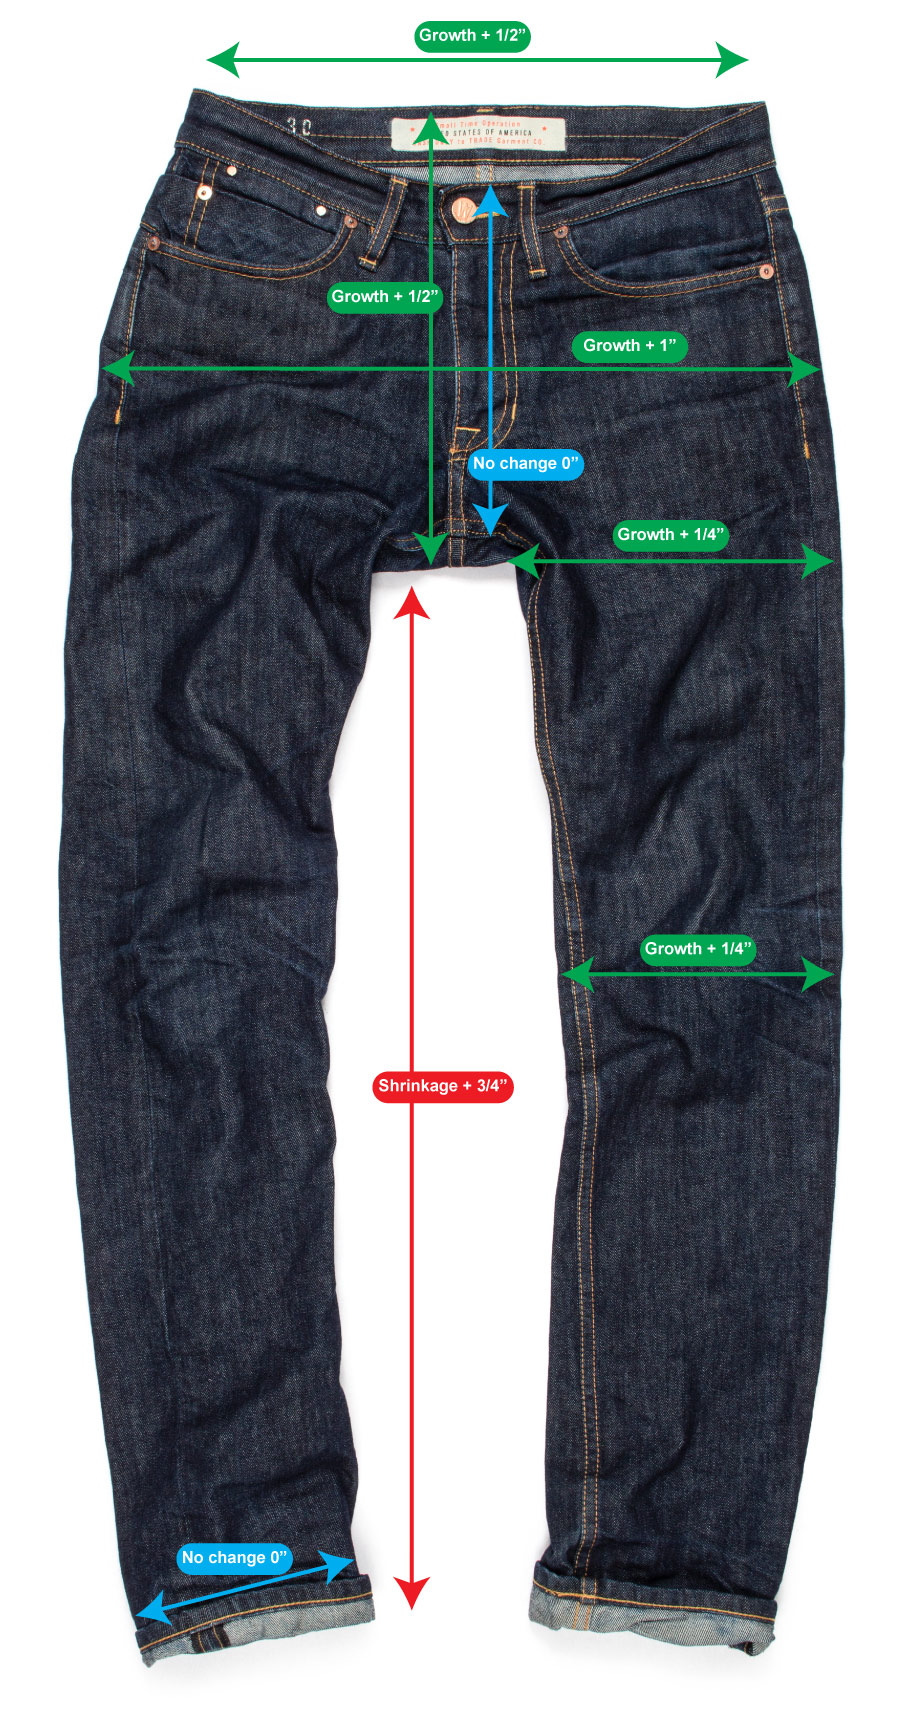 Measurements differences of between new and worn raw denim jeans